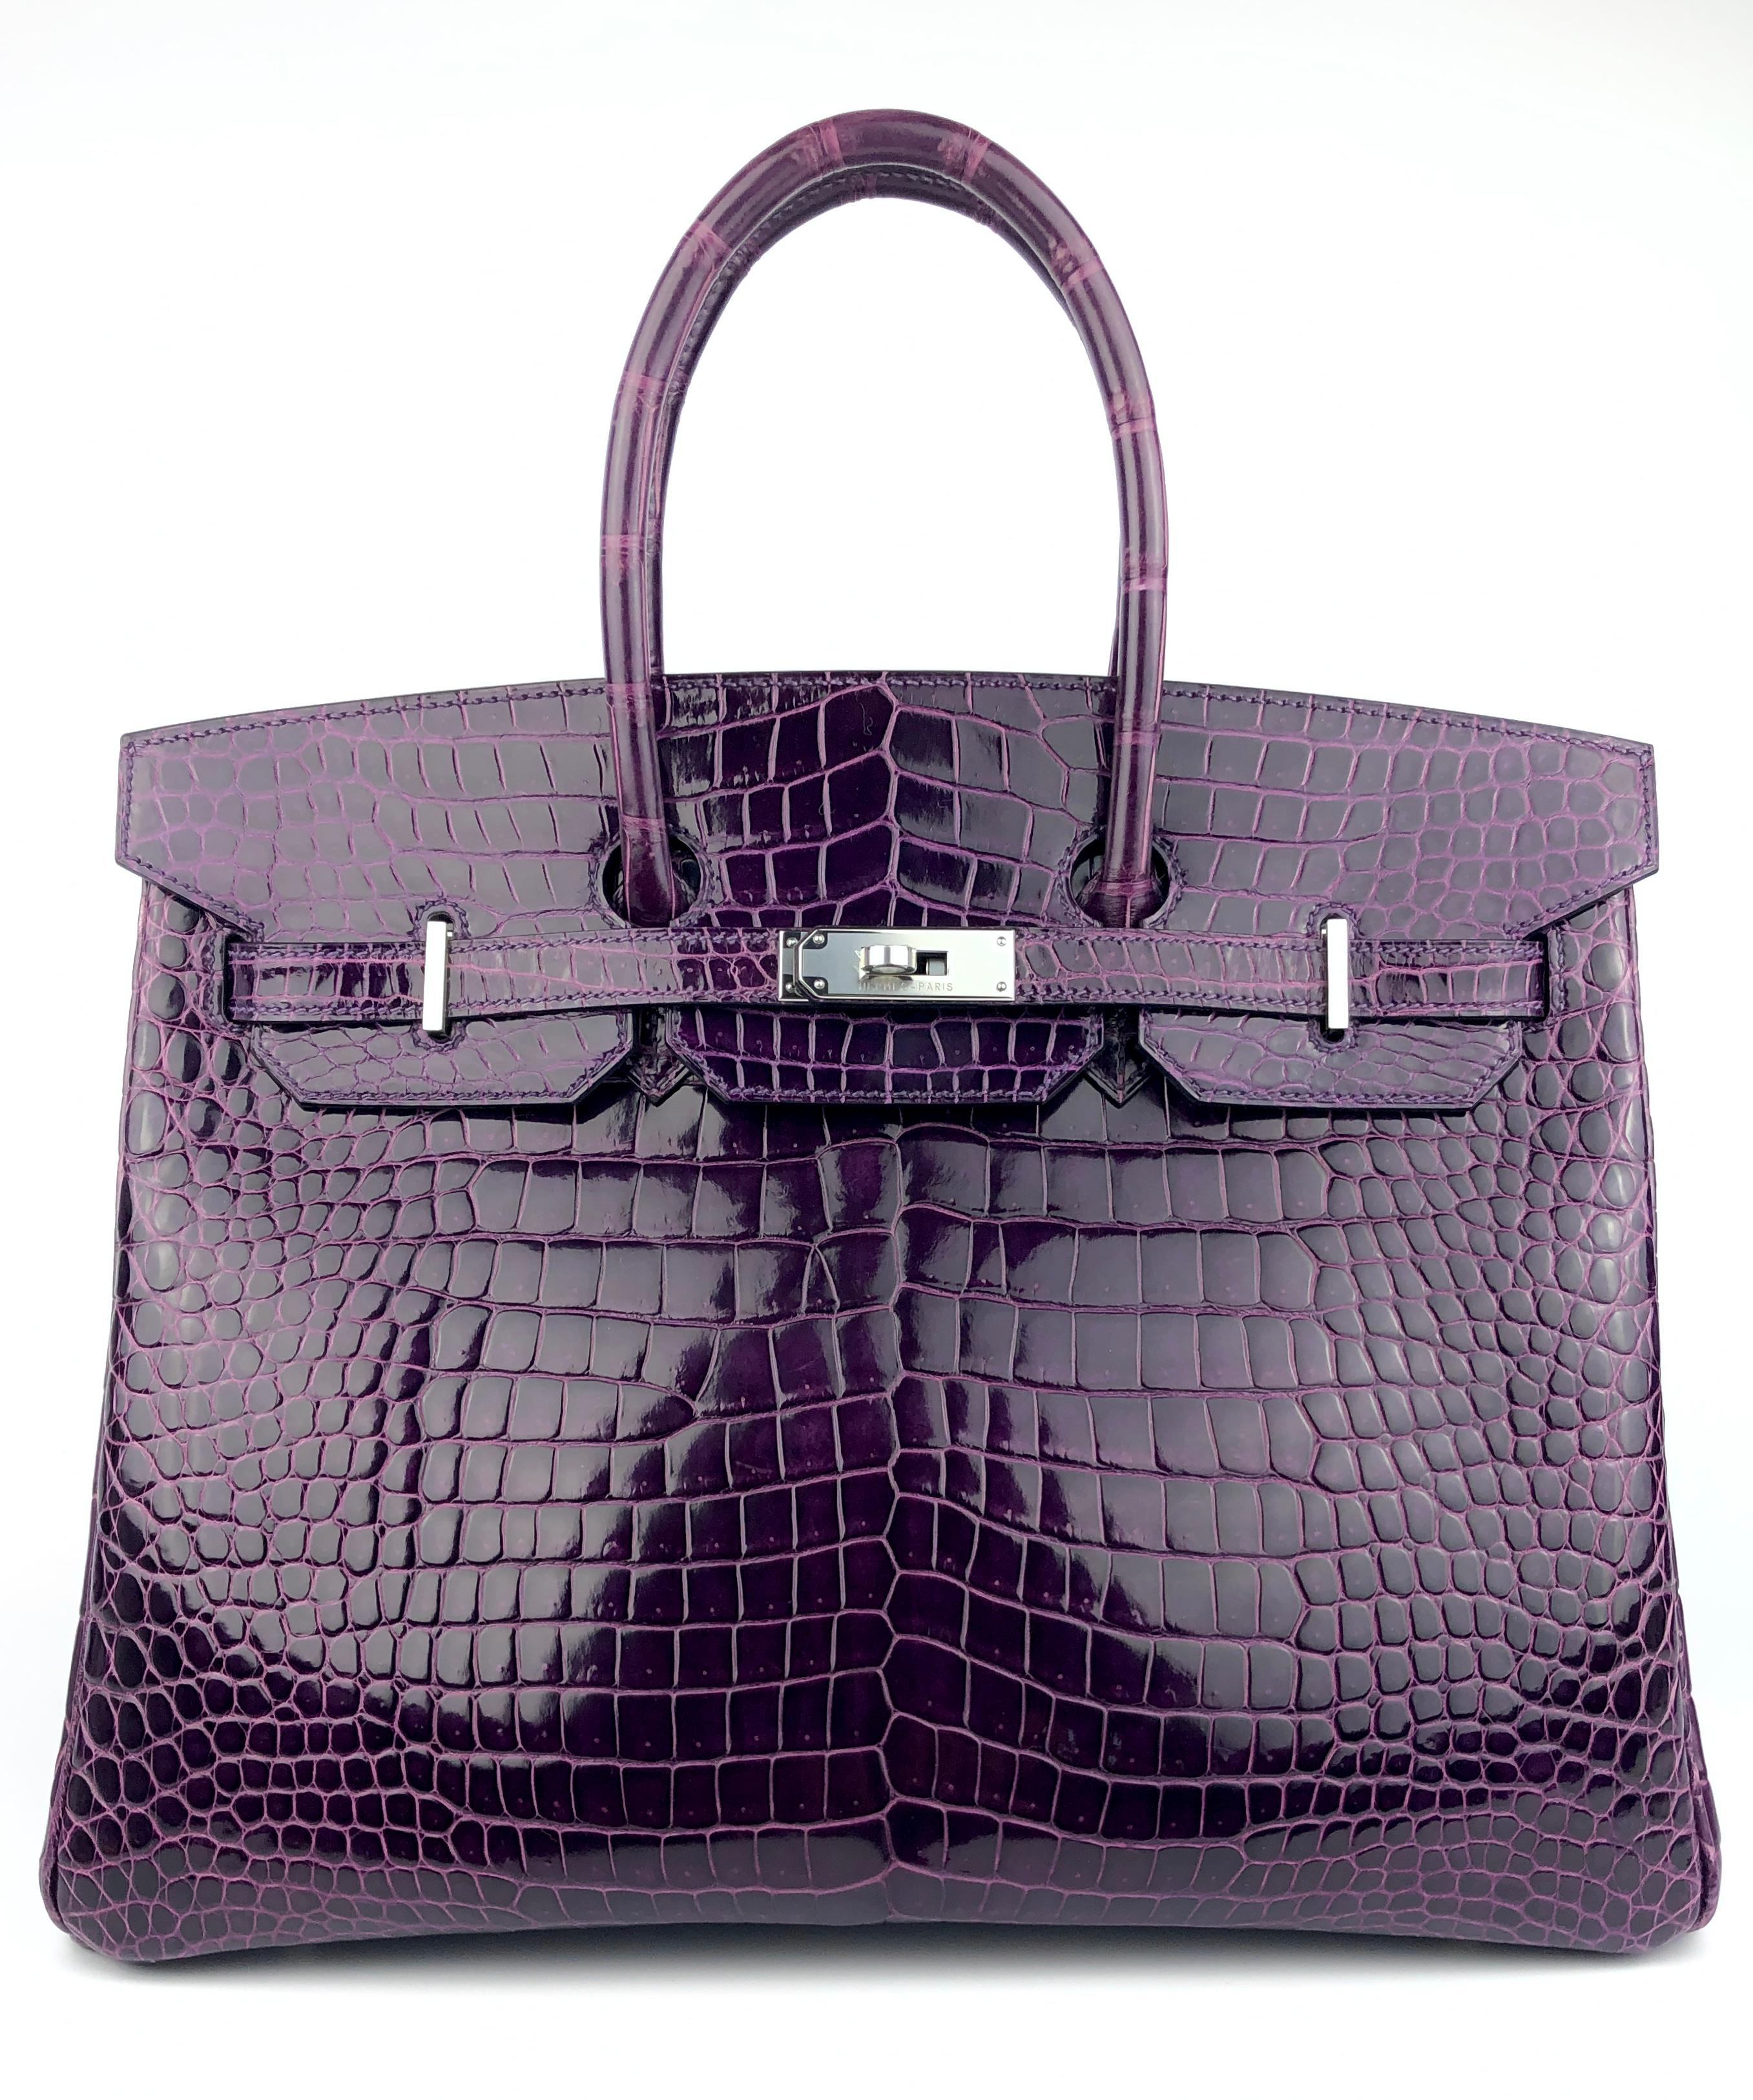 Absolutely Stunning RARE Hermes Birkin 35 Raisin Purple Crocodile Skin Leather Palladium Hardware. Pristine Condition, Plastic on hardware, perfect structure and corners. 

BEST PRICE ON THE MARKET! 

Please keep in mind that this is a pre owned